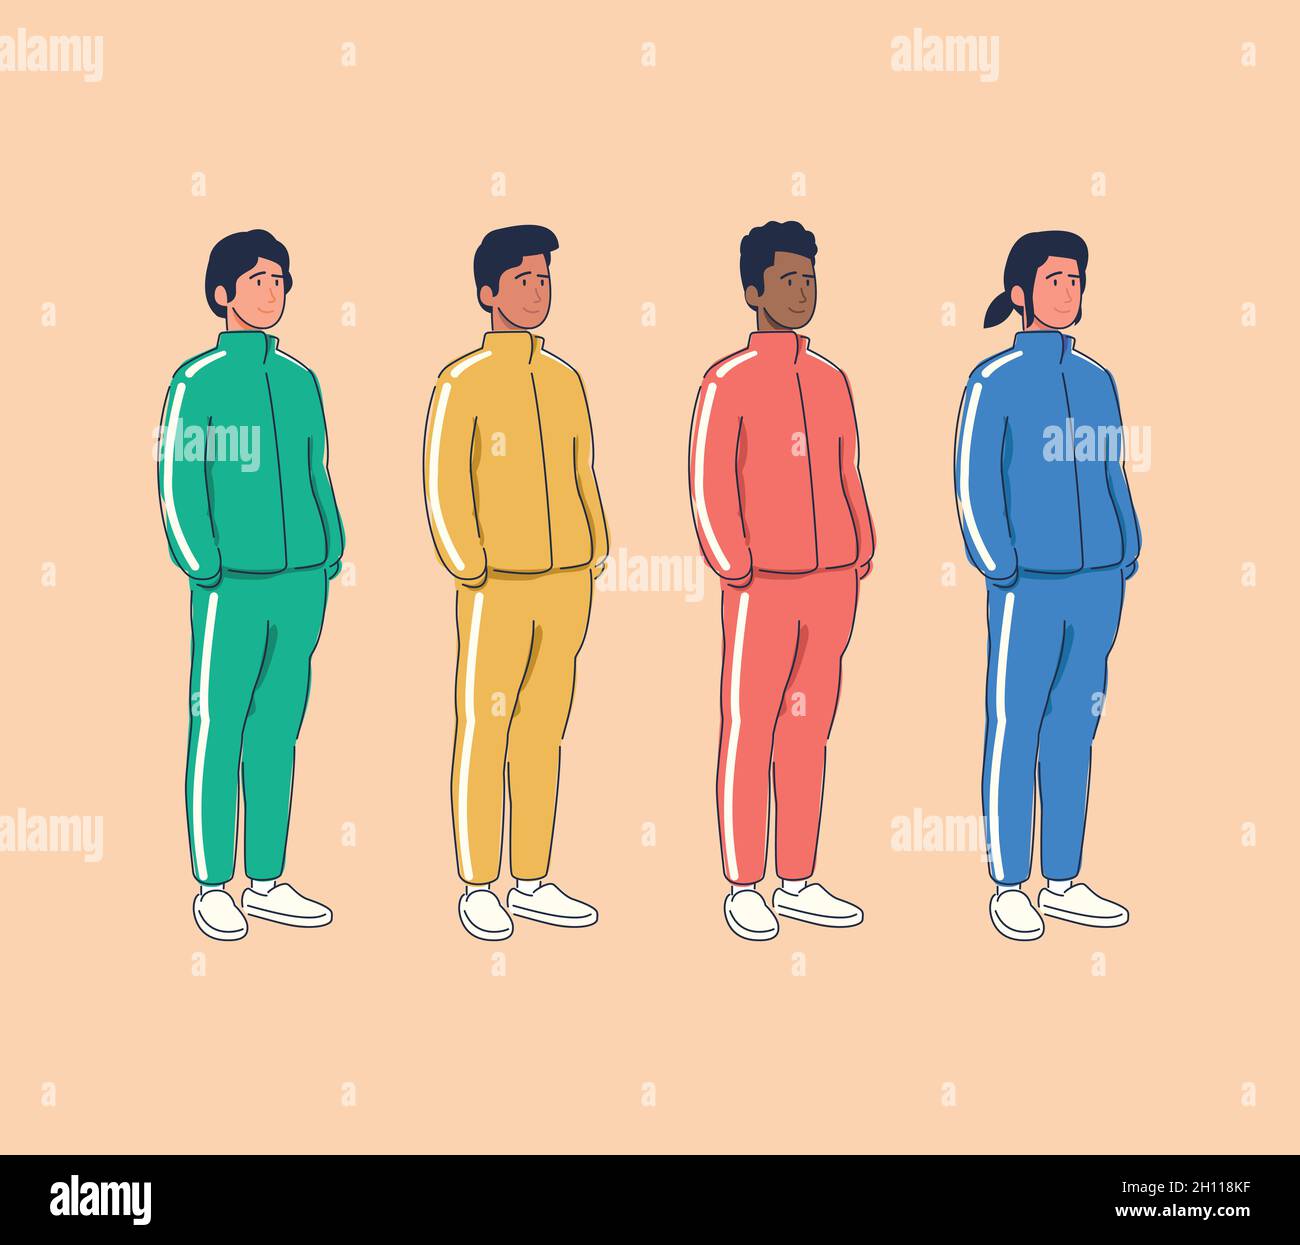 Diverse multiracial group of men wearing multicolor tracksuits. Flat cartoon stylized vector illustration. Stock Vector